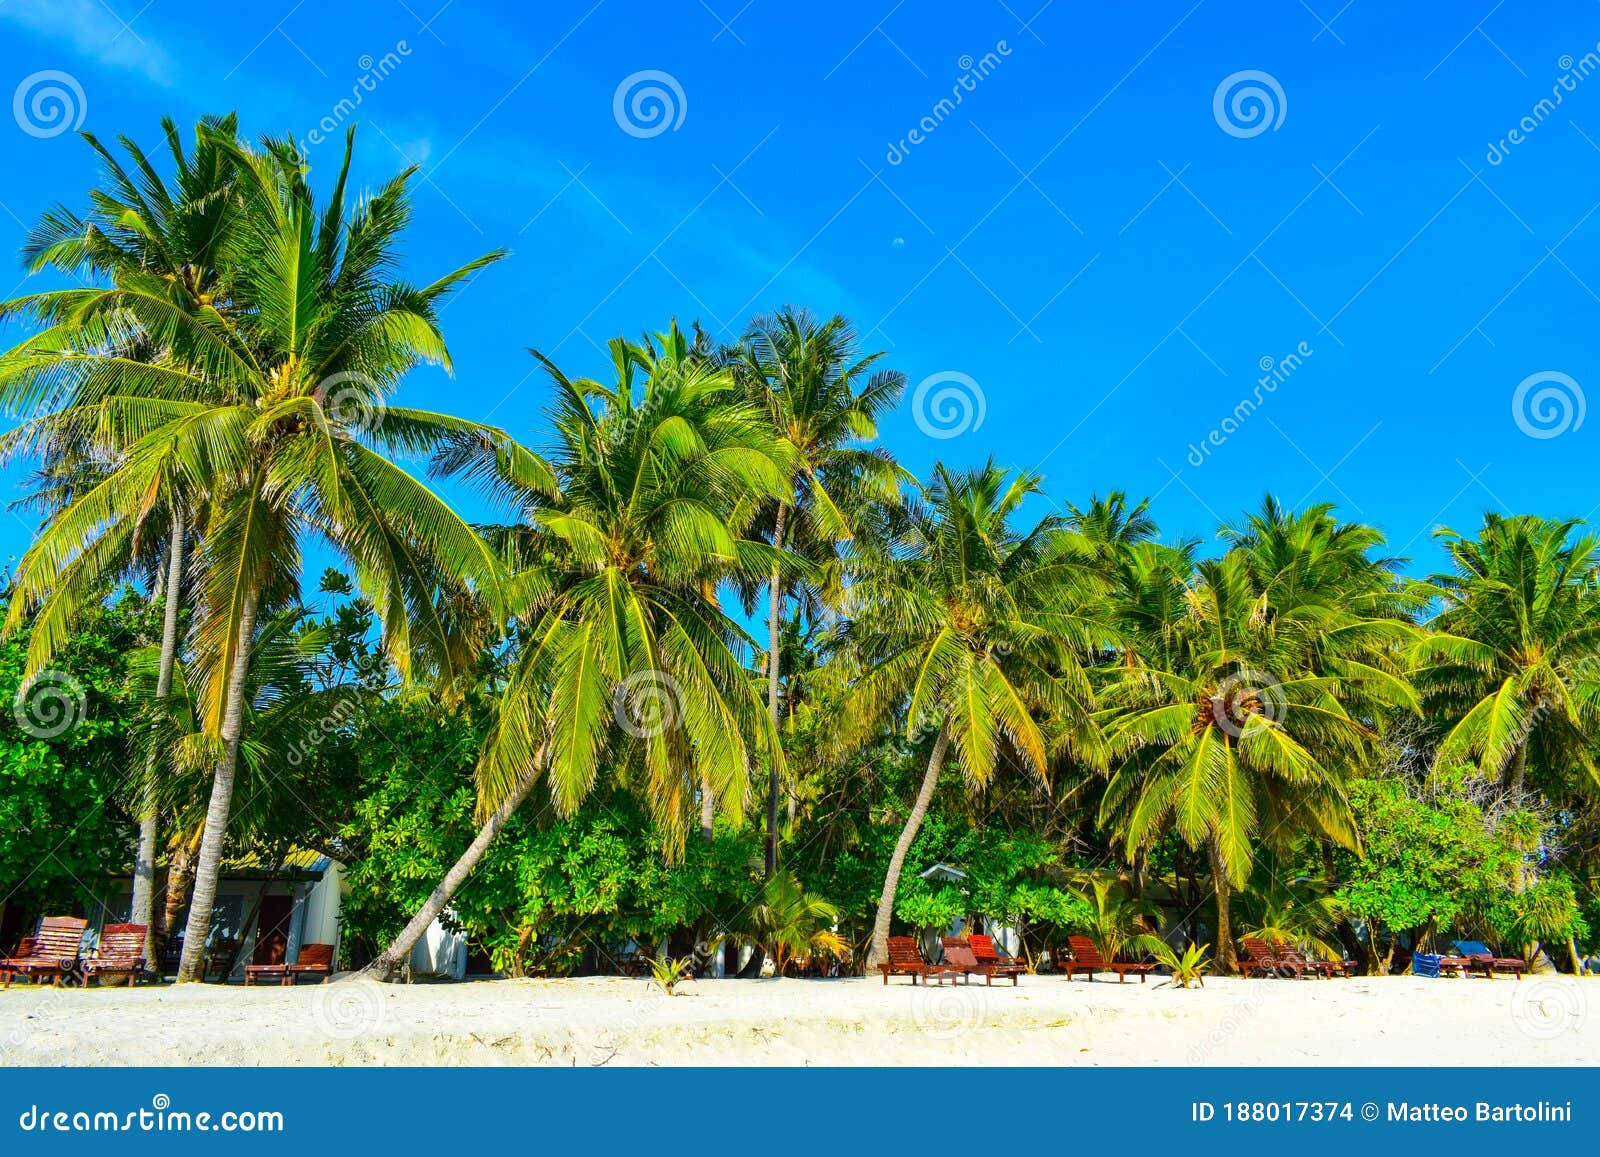 Sunny Beach with White Sand, Coconut Palm Trees and Turquoise Sea ...